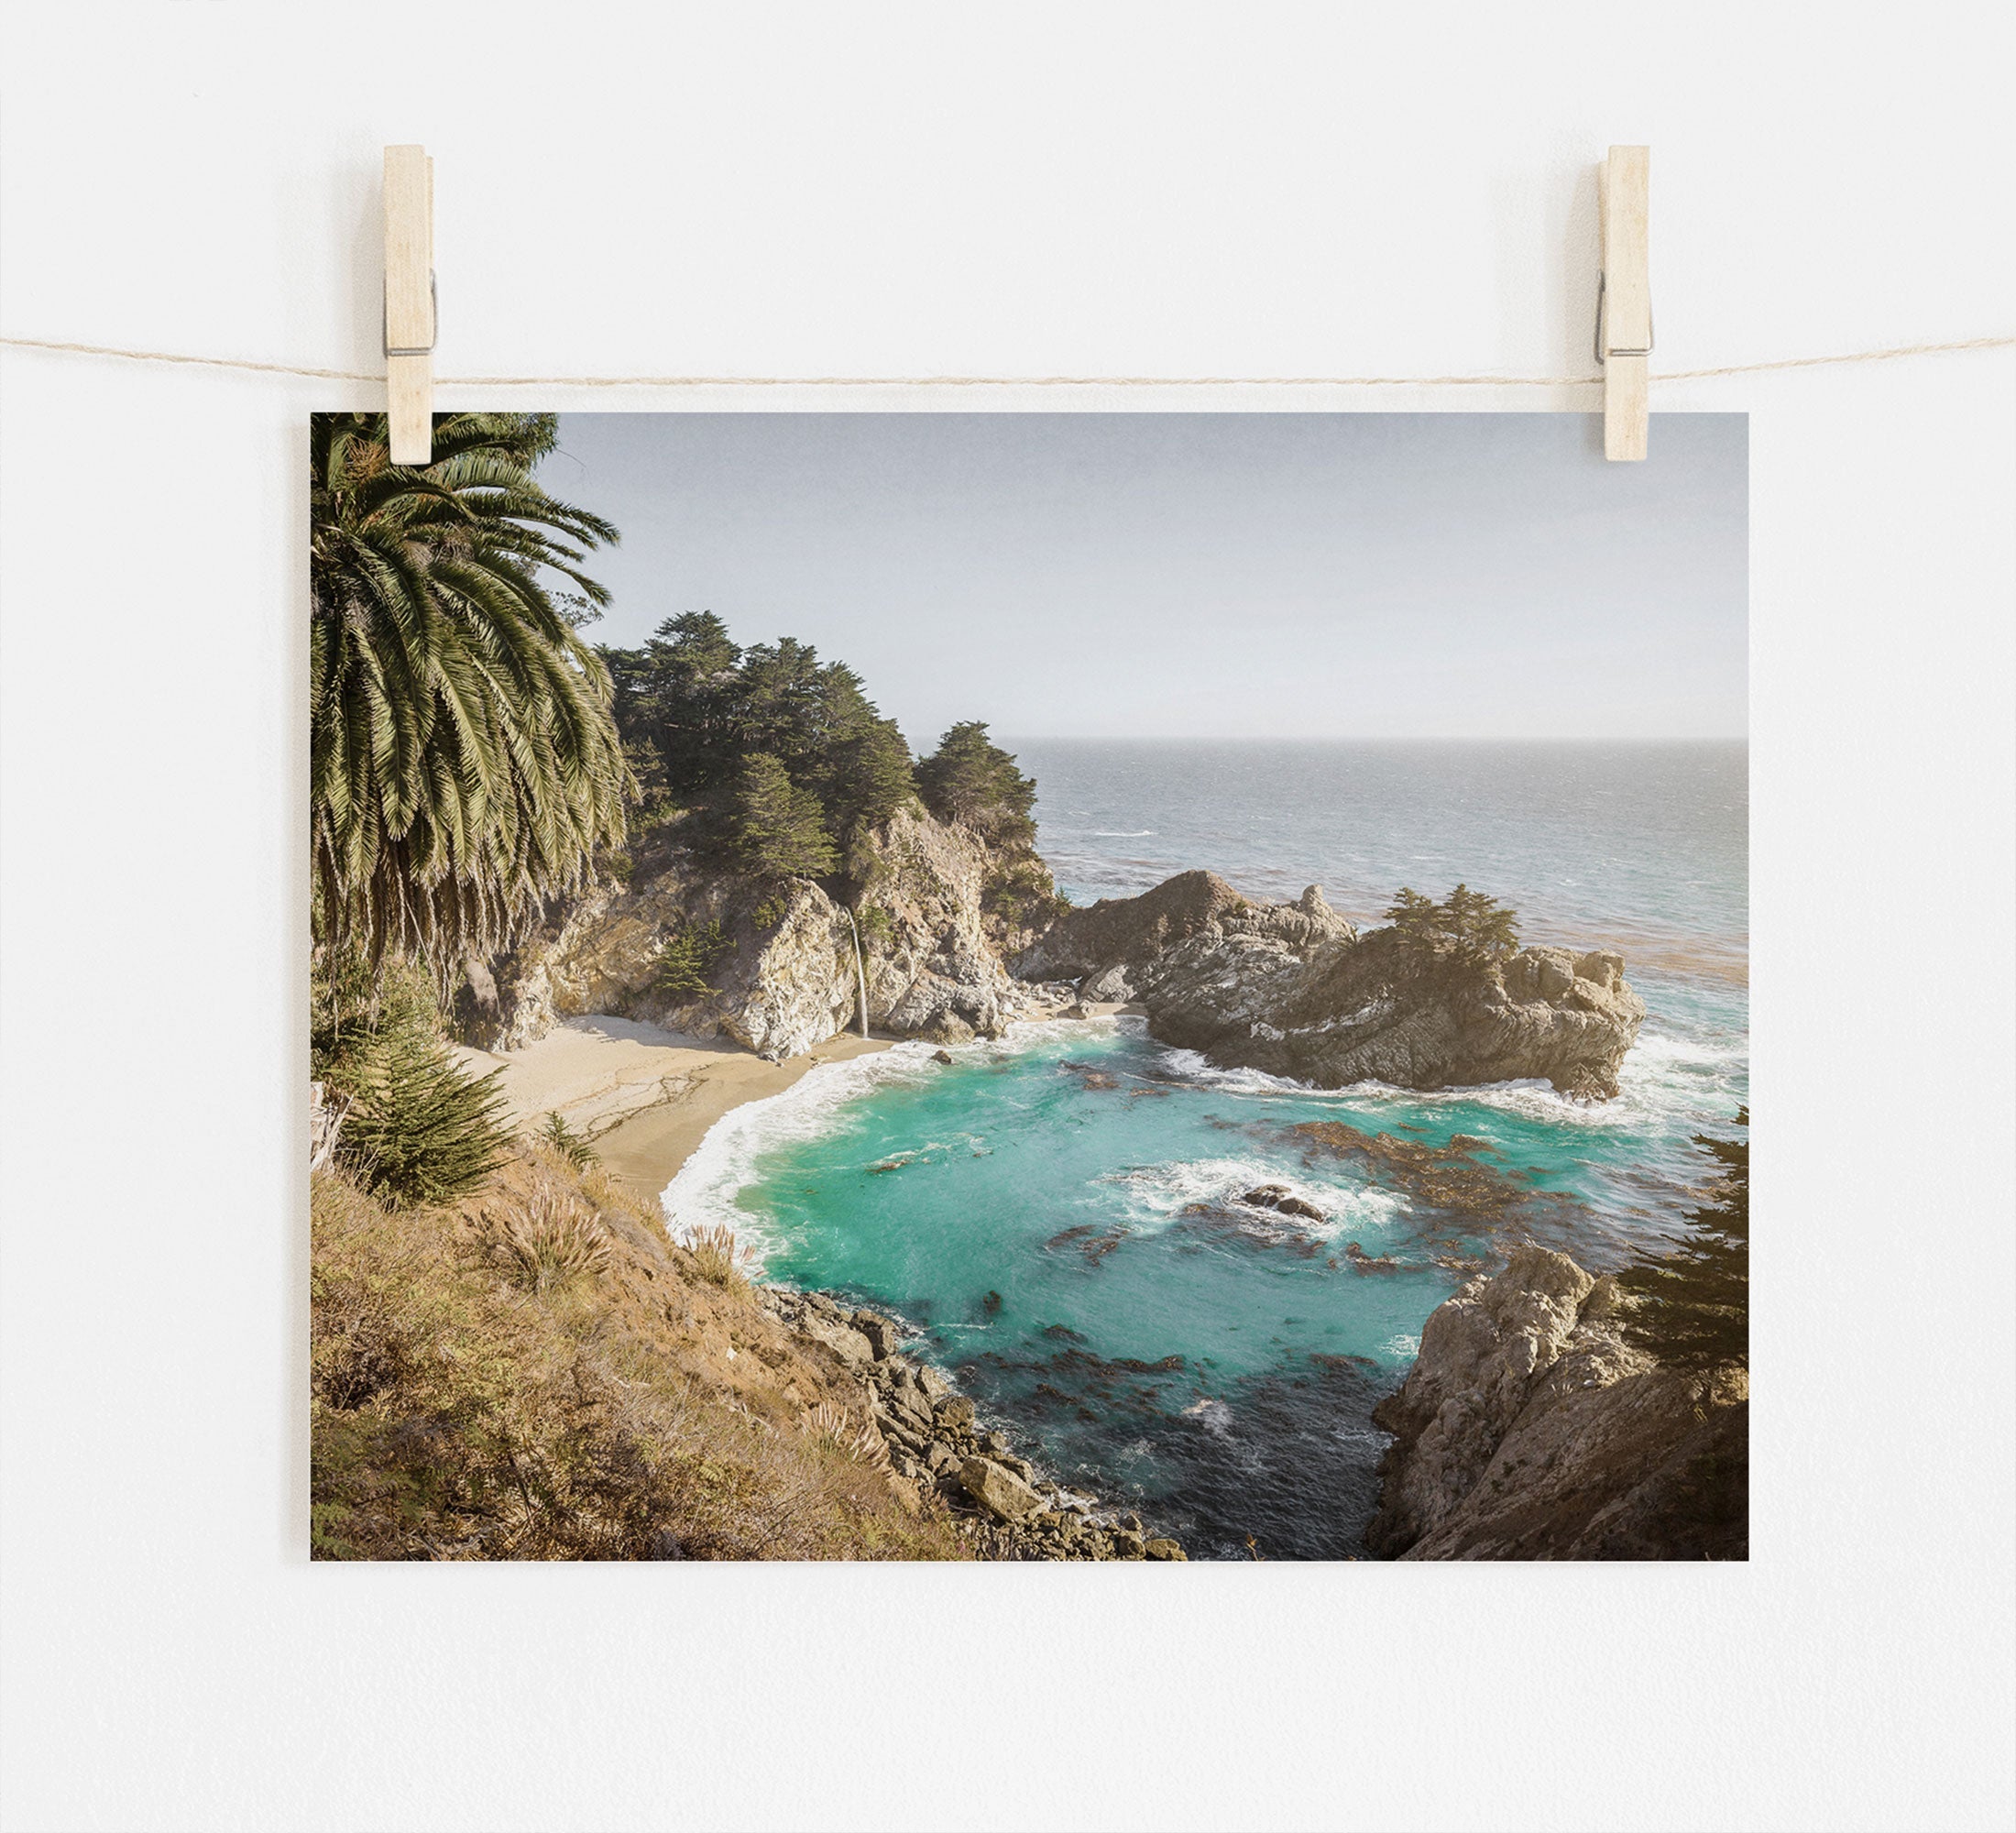 Photo of a scenic Offley Green Big Sur Coastal Print, 'Julia Pffeifer' with turquoise waters, suspended by clothespins. The view includes rocky cliffs, a sandy beach, and lush greenery under a bright sky.